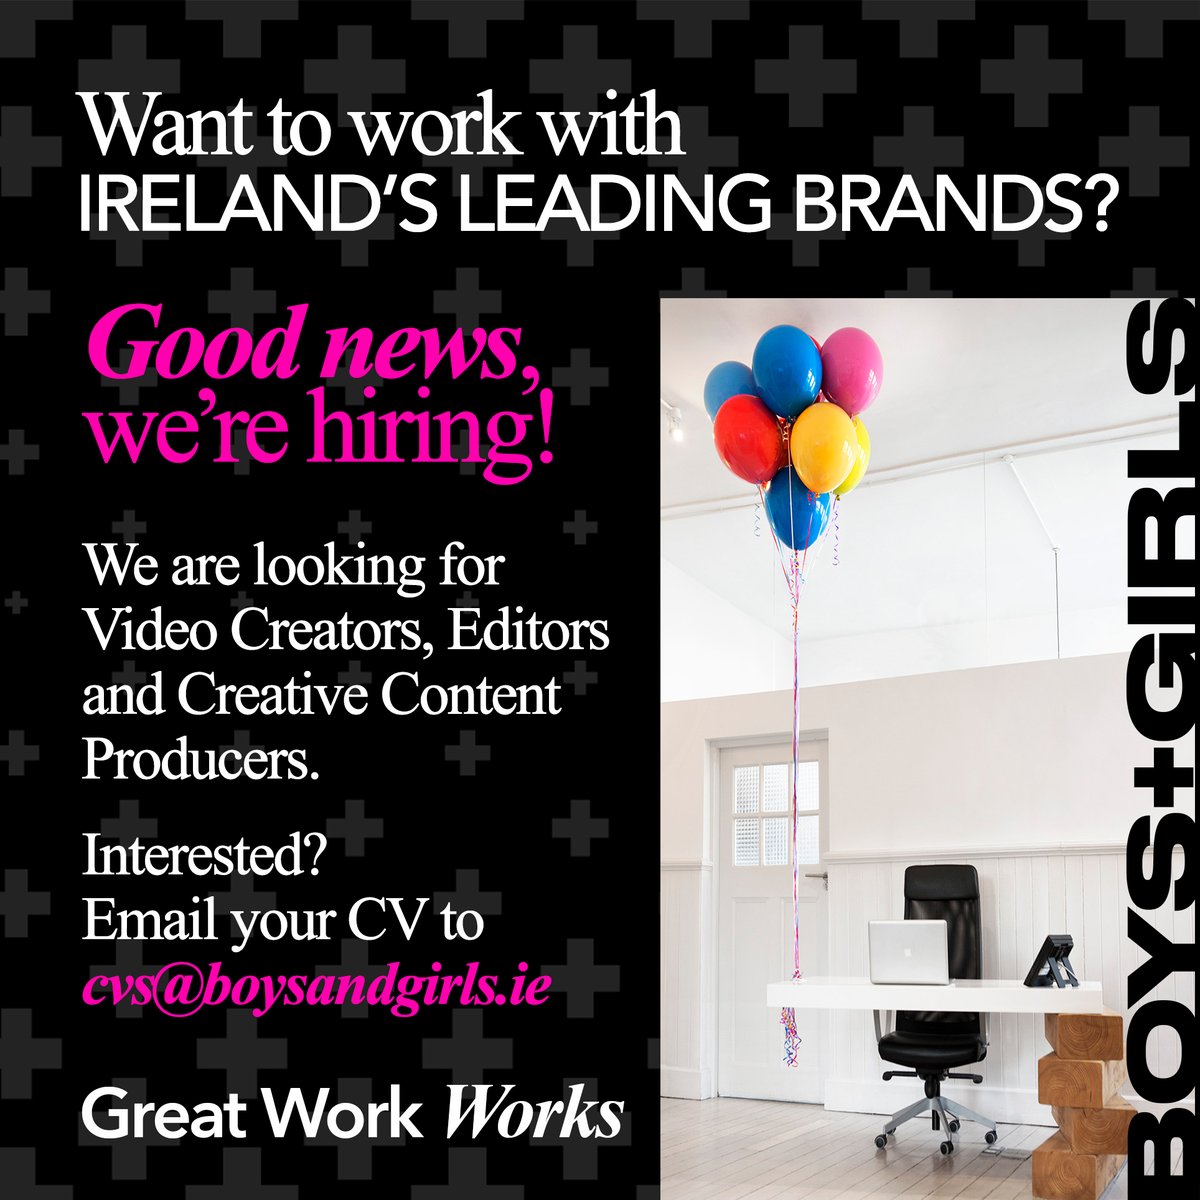 Do you love content? We're hiring for the following positions in both full-time and freelance capacity. - Video Creators - Editors - Creative Content Producers Interested? Email your CV to cvs@boysandgirls.ie with the subject line ‘Content Position'. #hiring #jobfairy